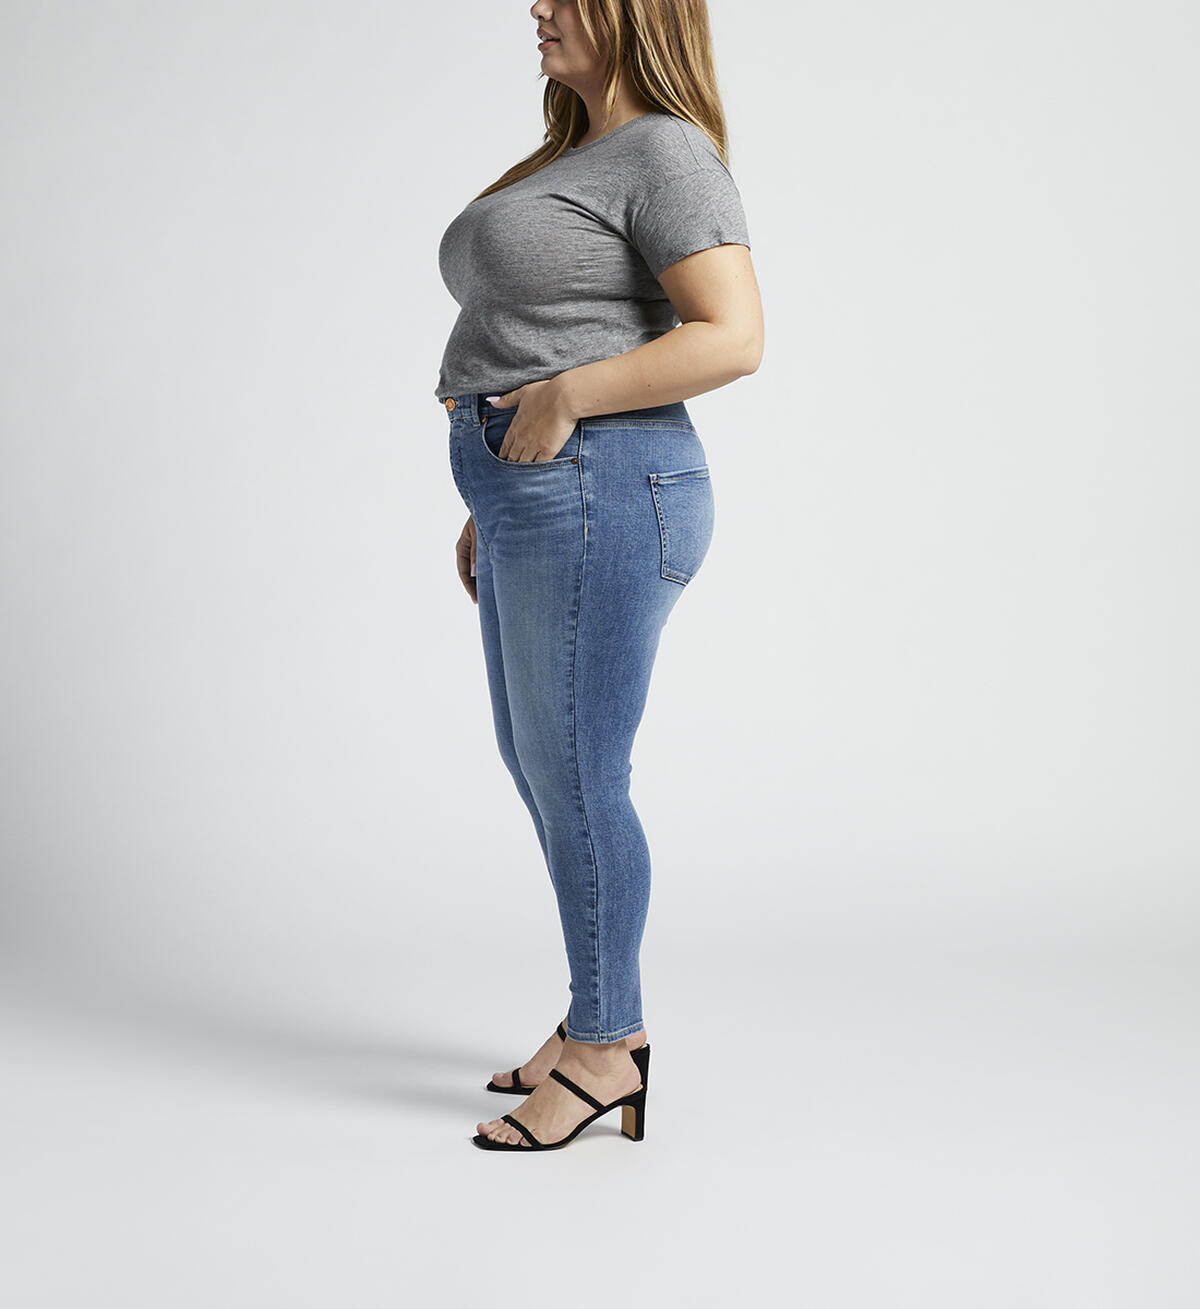 Valentina High Rise Skinny Crop Pull-On Jeans Plus Size, , hi-res image number 2